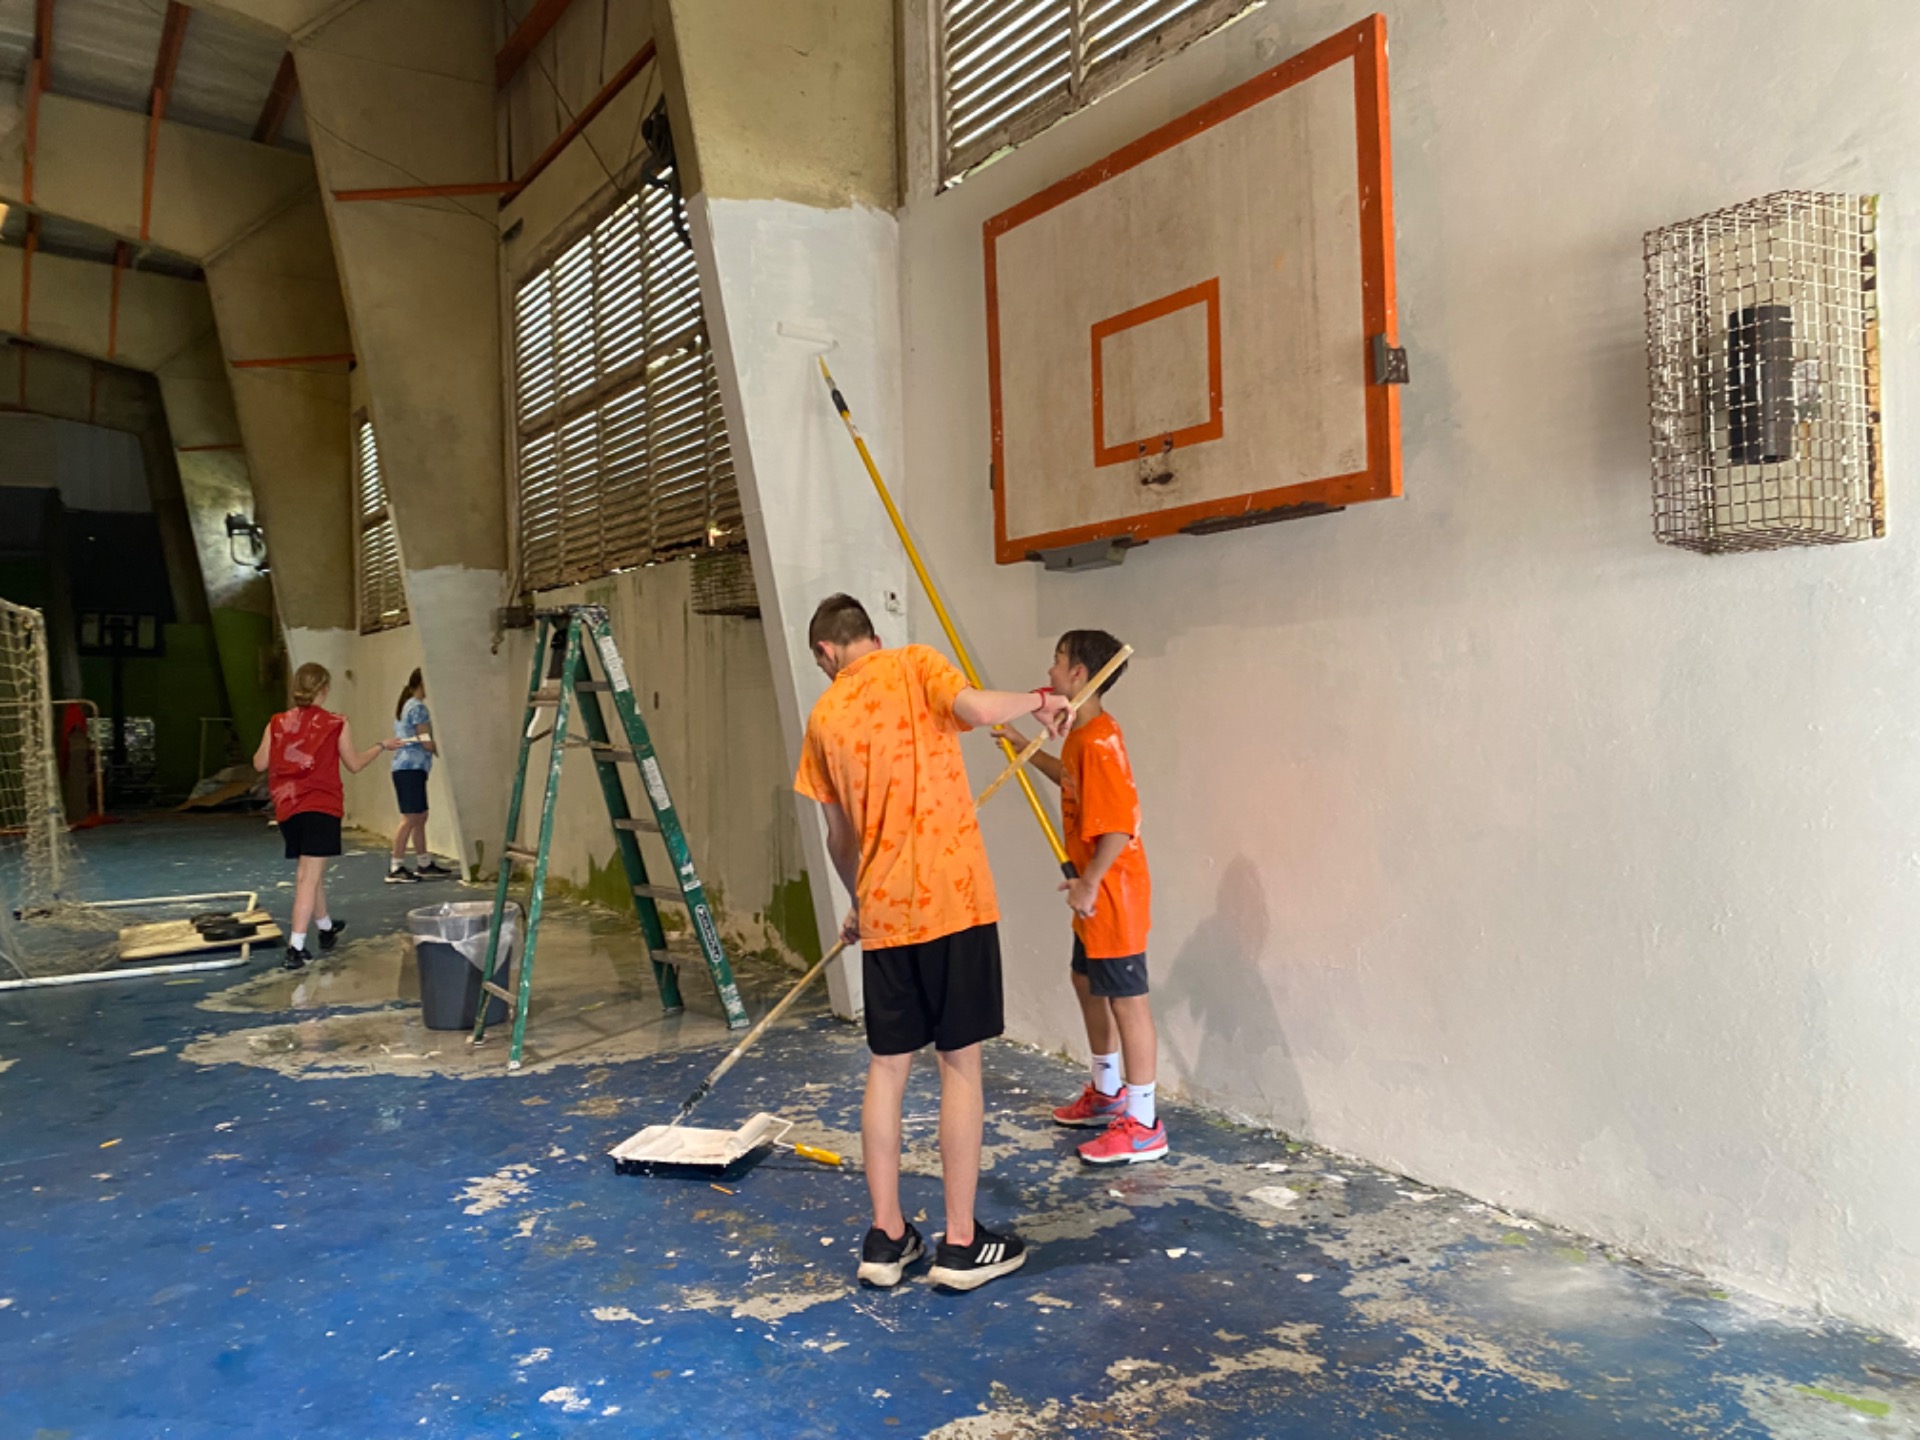 Painting Project - Basketball Court Yard Part 2